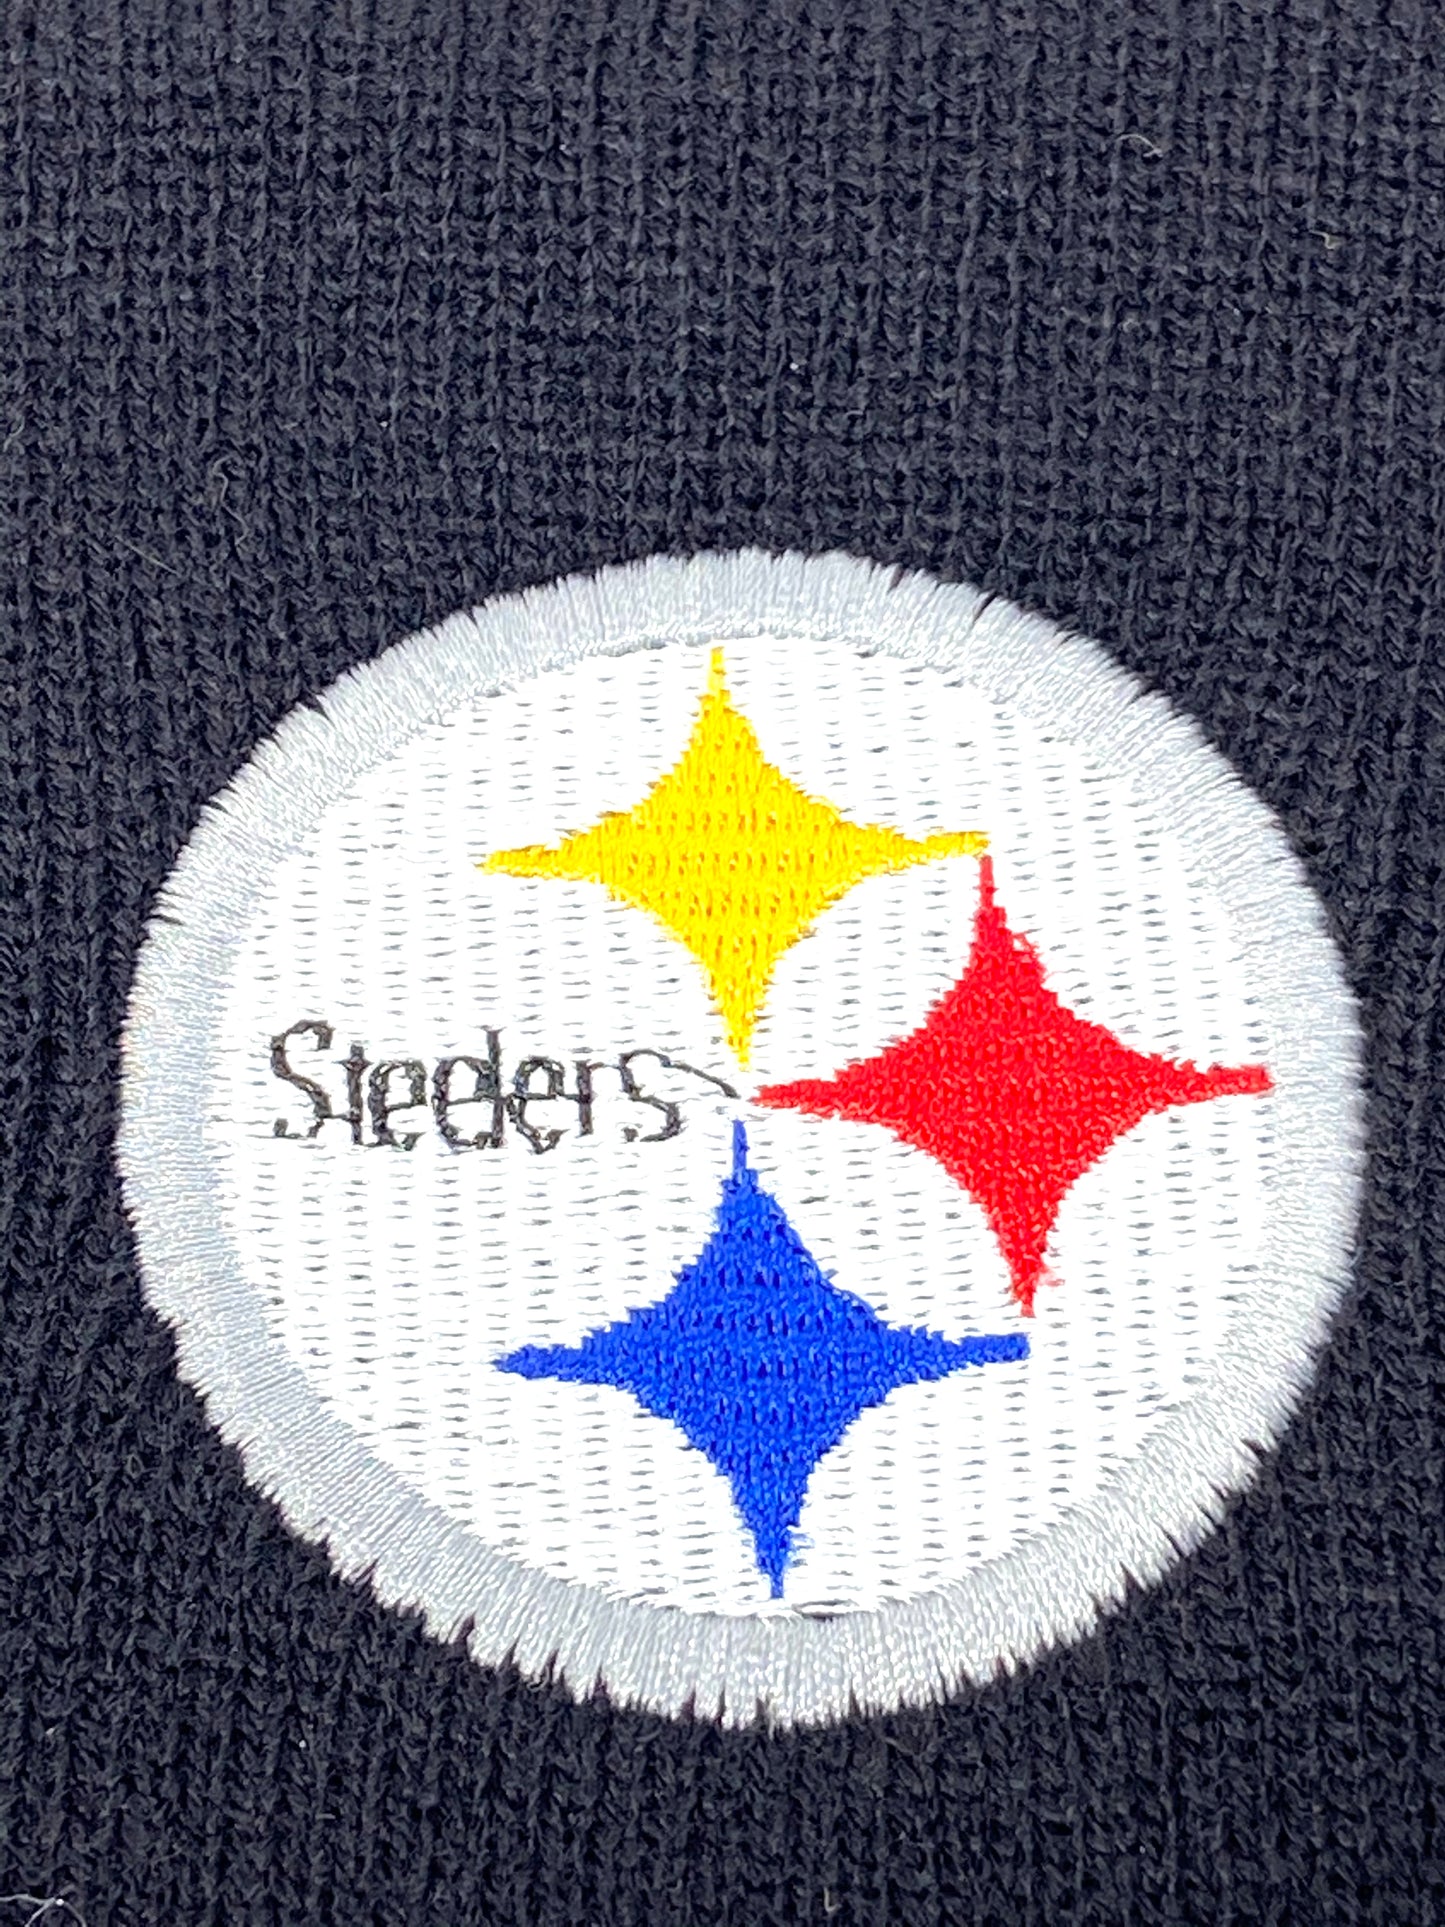 Pittsburgh Steelers Vintage NFL Black Knit Cuffed Hat by Logo Athletic